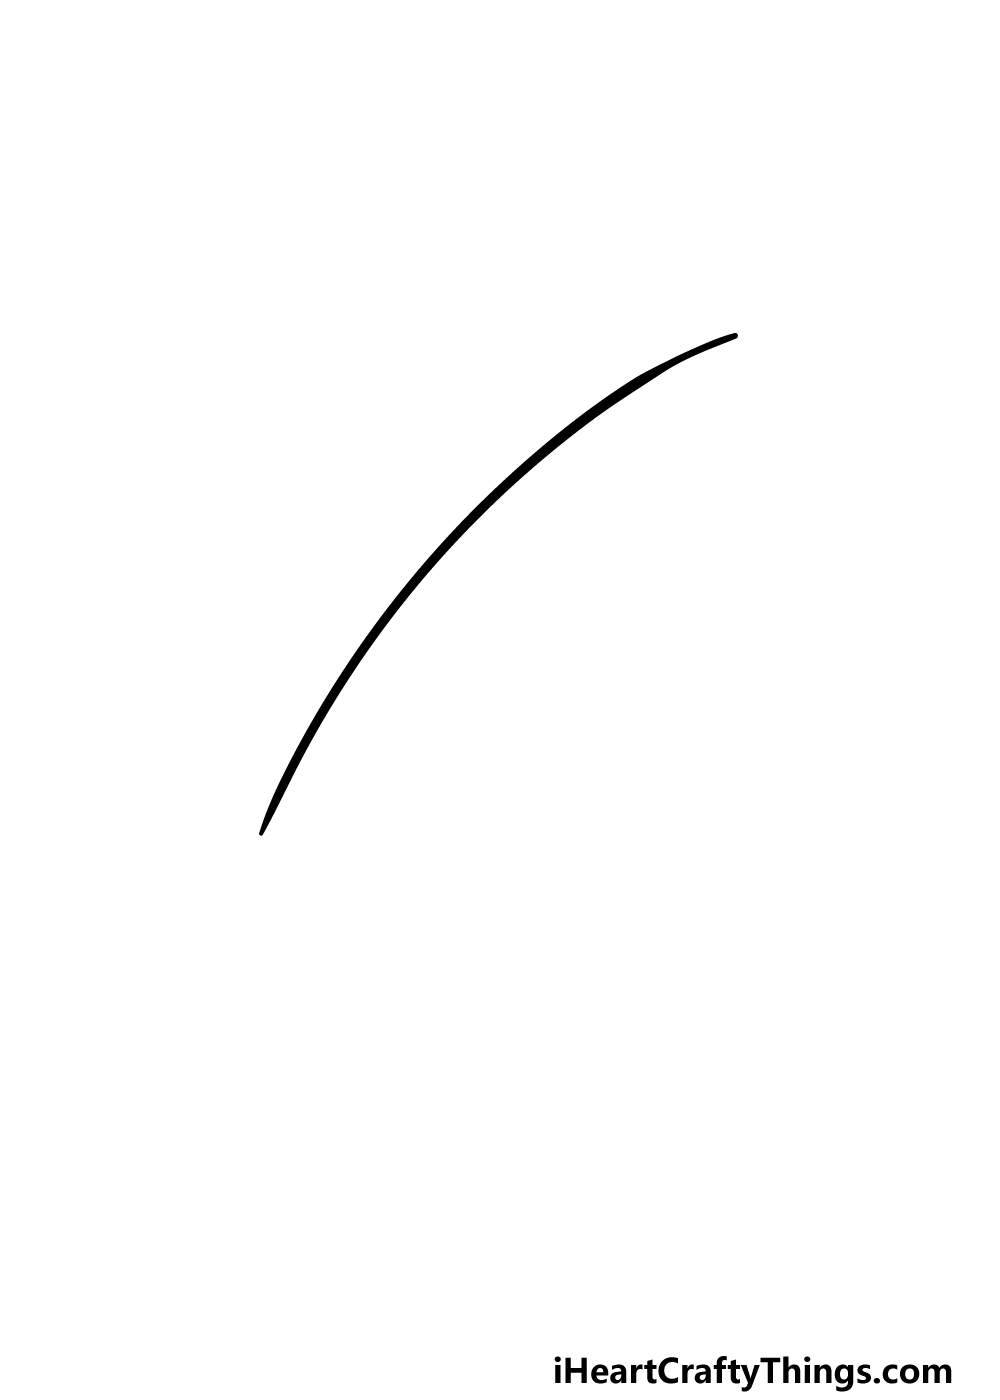 how to draw a fishing pole step 1